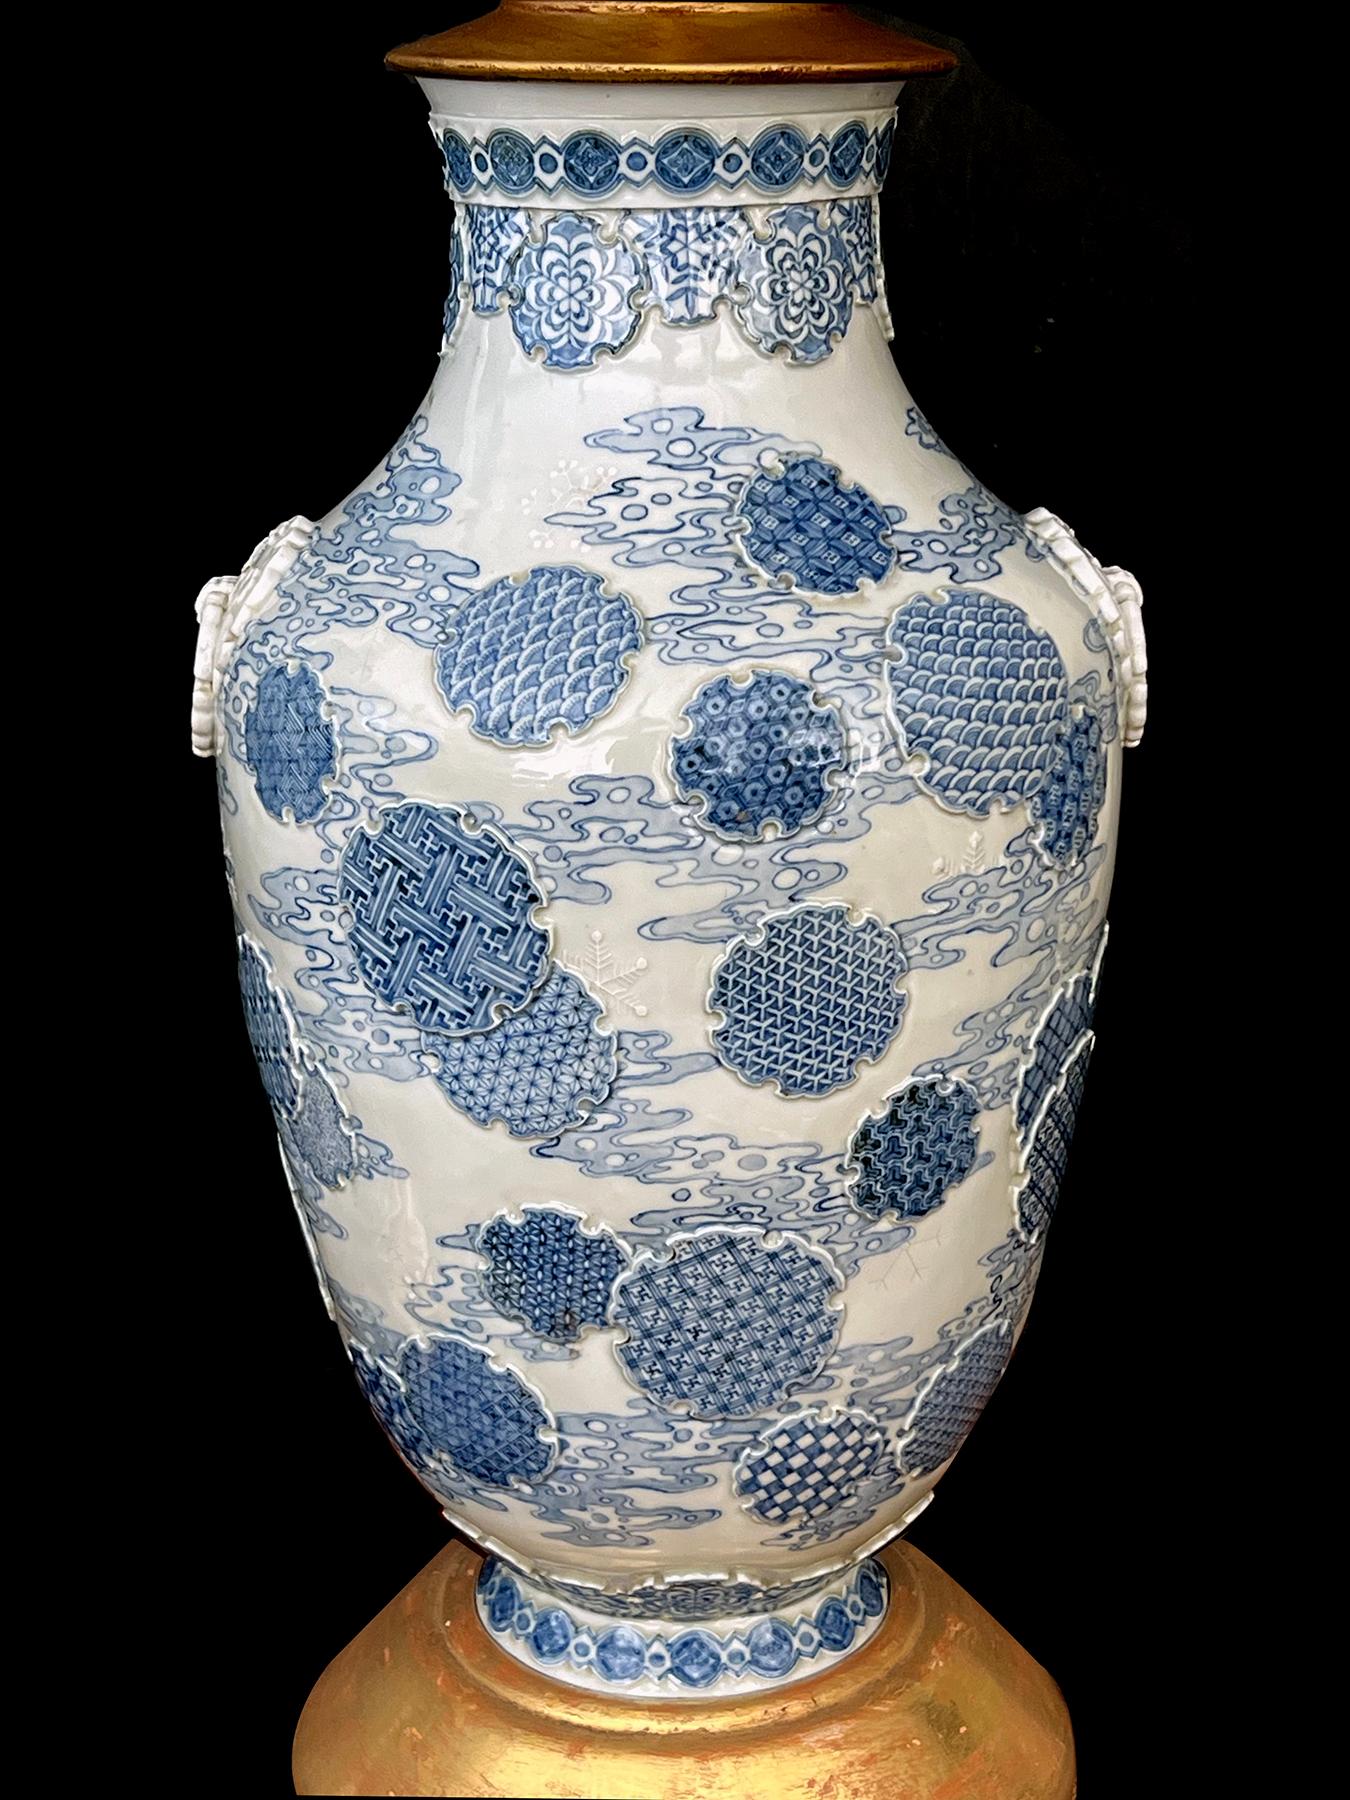 each ovoid vase with raised decoration at the neck and adorned overall with raised medallions all on a pale blue ground with painted cloud scrolls; the vase flanked by applied ring handles; each marked on underside; the vases were vetted in 1992 by